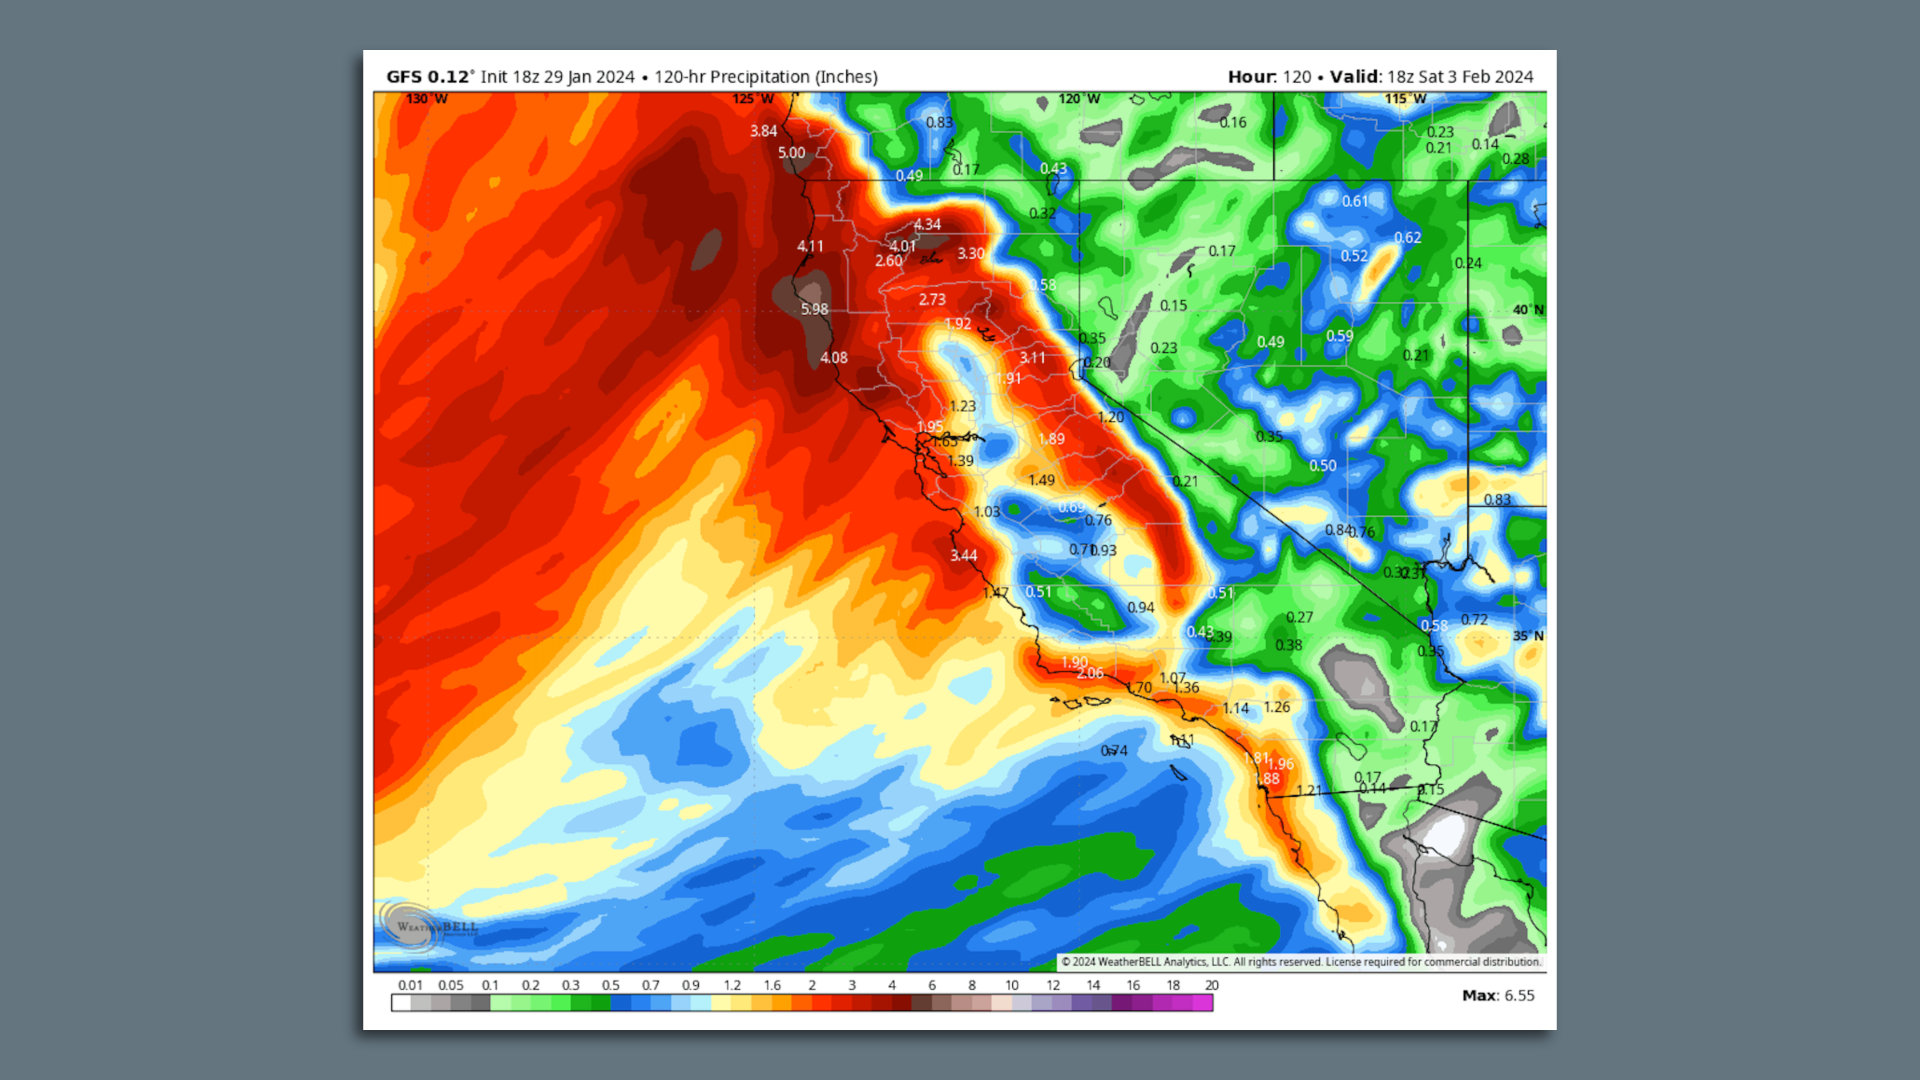 Map showing precipitation totals during the next week in California and nearby states. 